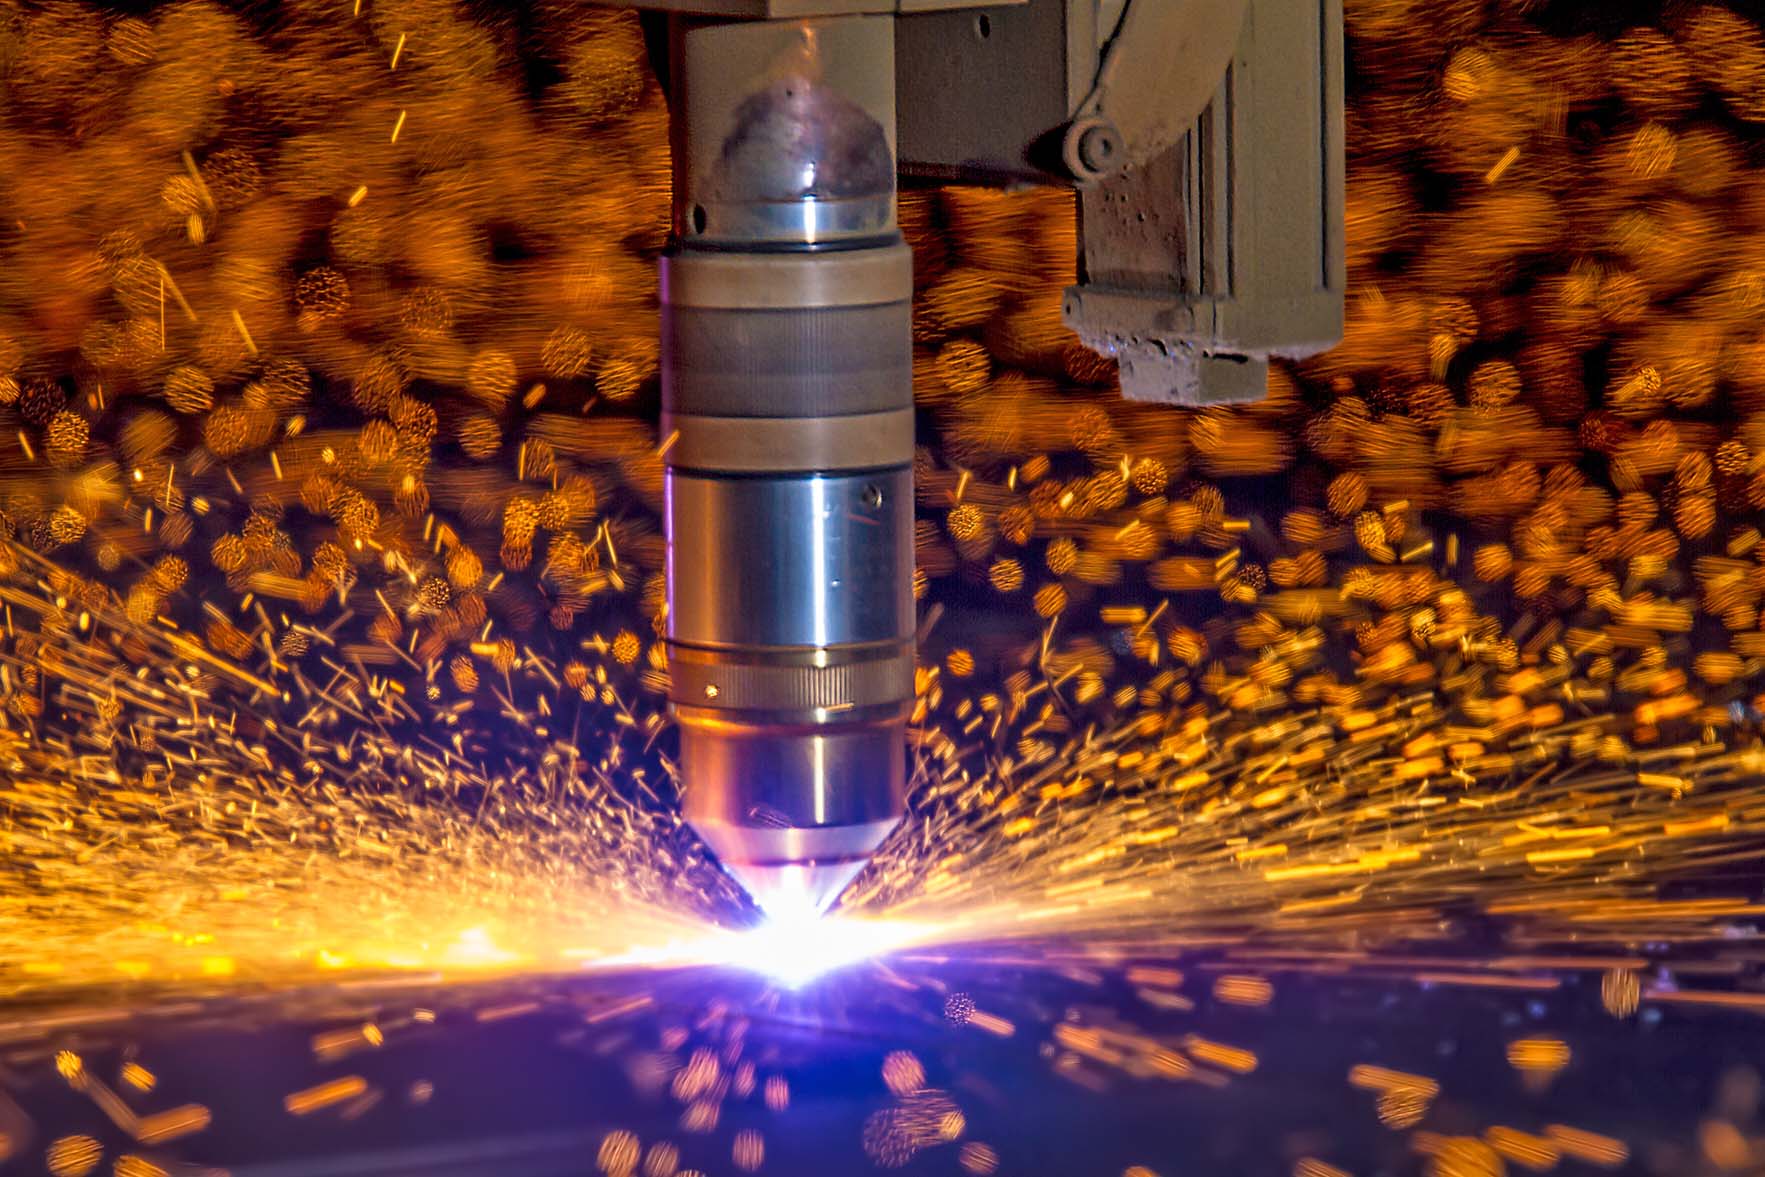 How Do Plasma Cutters Work? - Grainger KnowHow